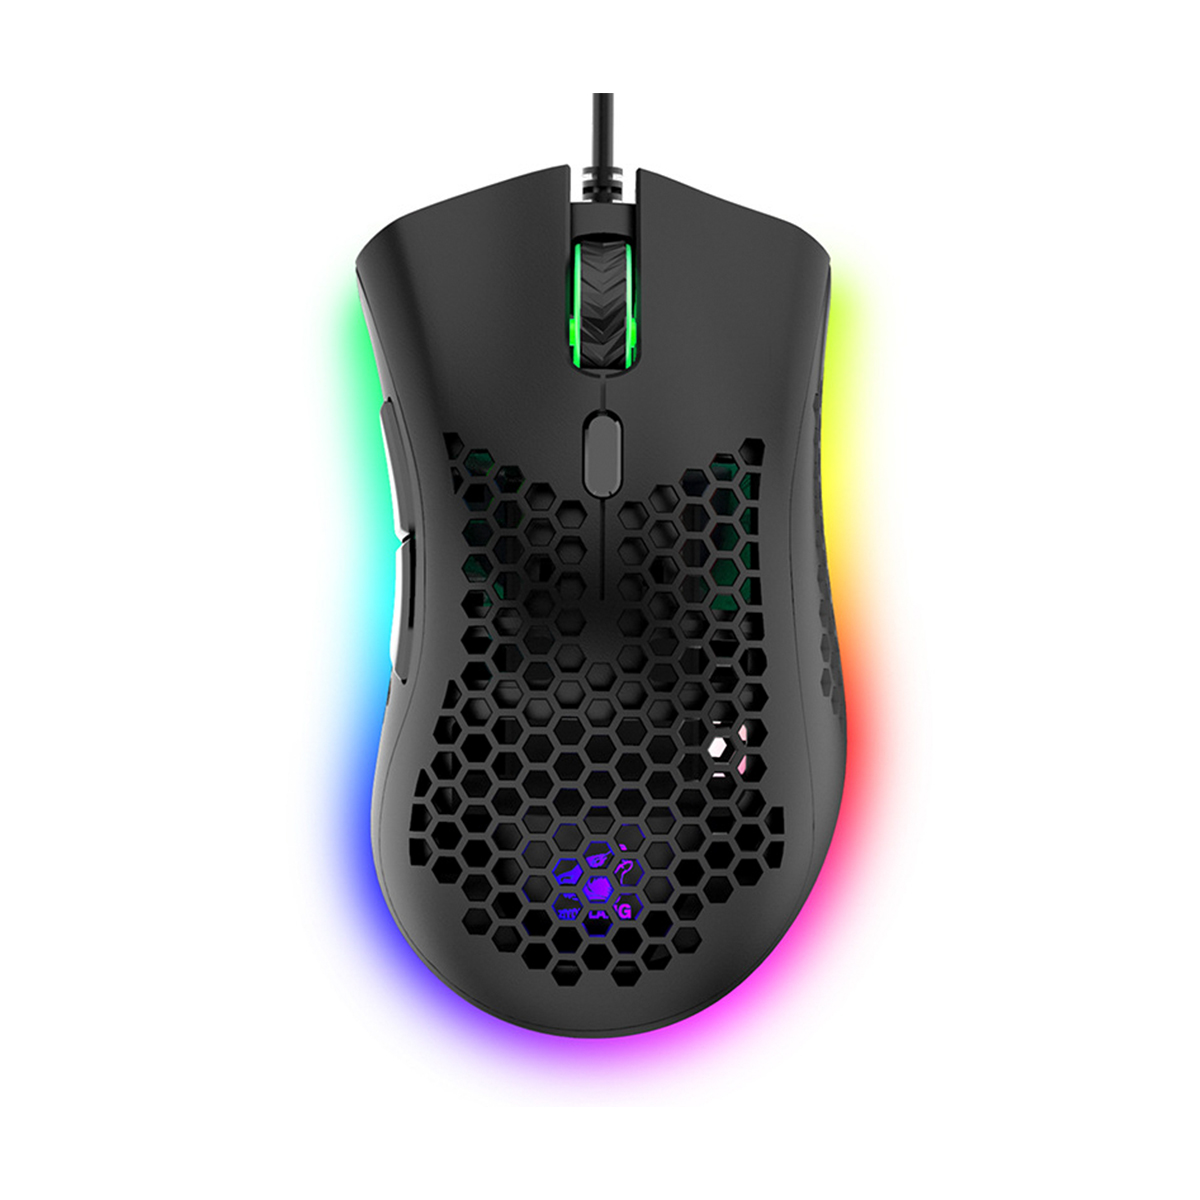 Wired-Gaming-Mouse-RGB-Lamp-12000DPI-Lightweight-For-LaptopDesktop-1740875-12